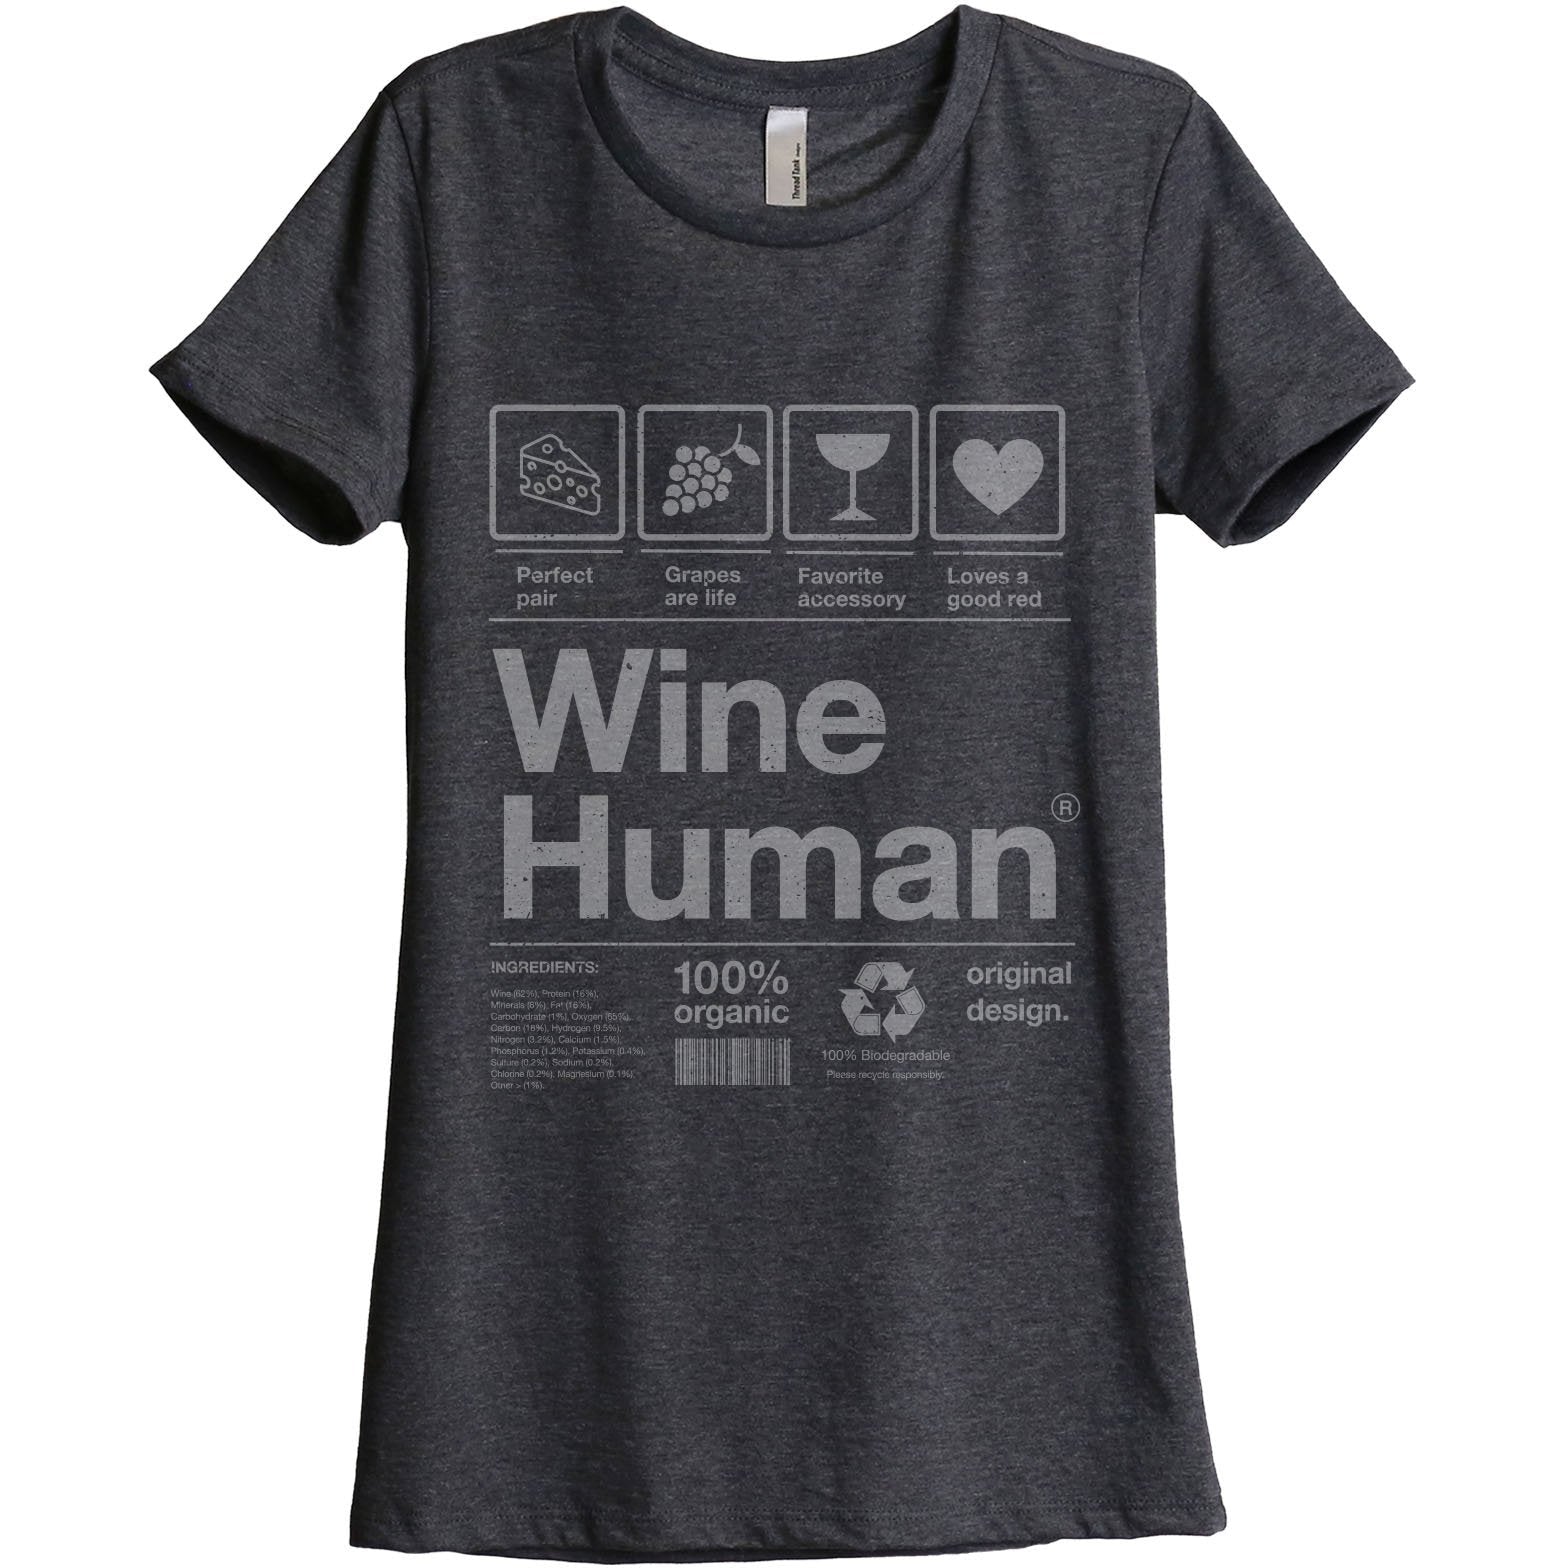 Wine Human - Stories You Can Wear